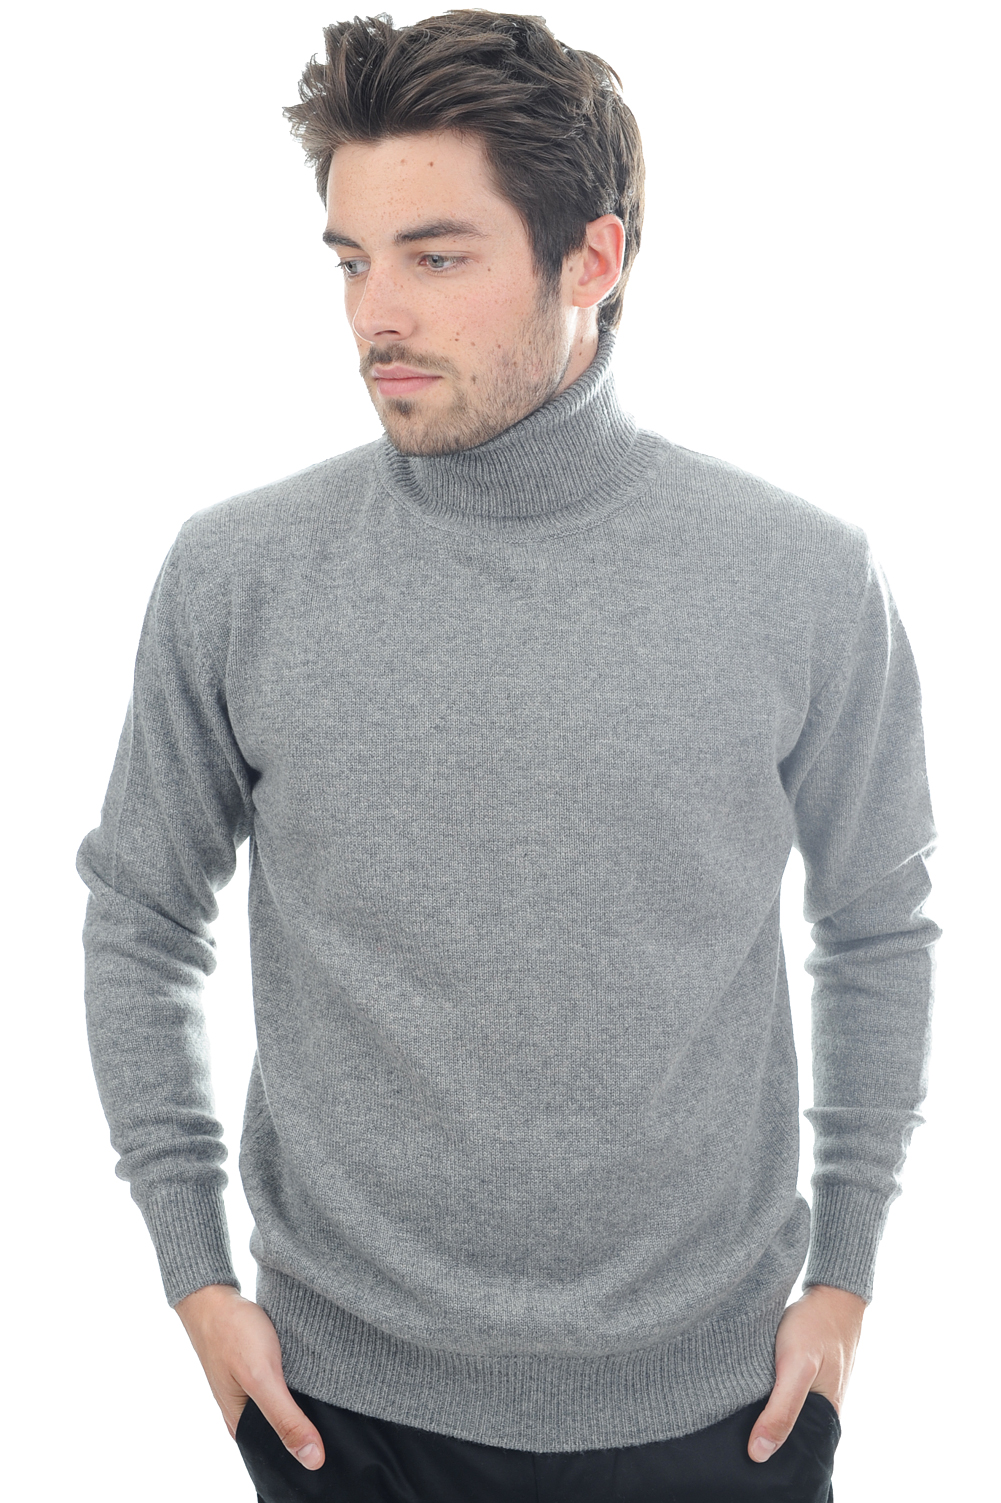 Cachemire pull homme edgar 4f gris chine s